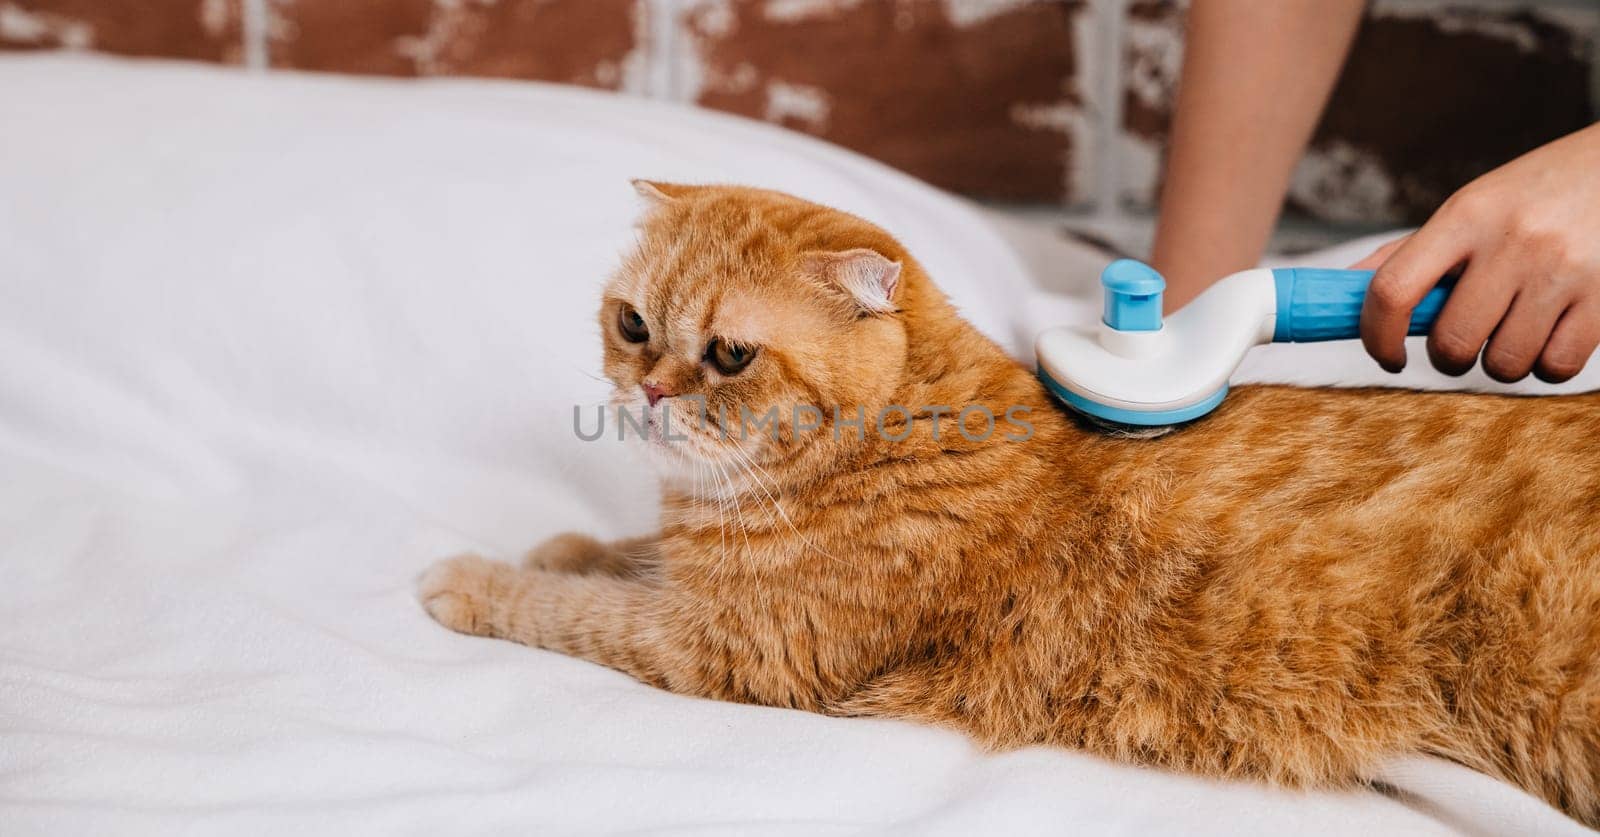 Owner's care, A woman lovingly combs her Scottish Fold cat's fur while the ginger cat enjoys a serene sleep on her hand. A cozy and heartwarming morning scene. Pat love routine by Sorapop